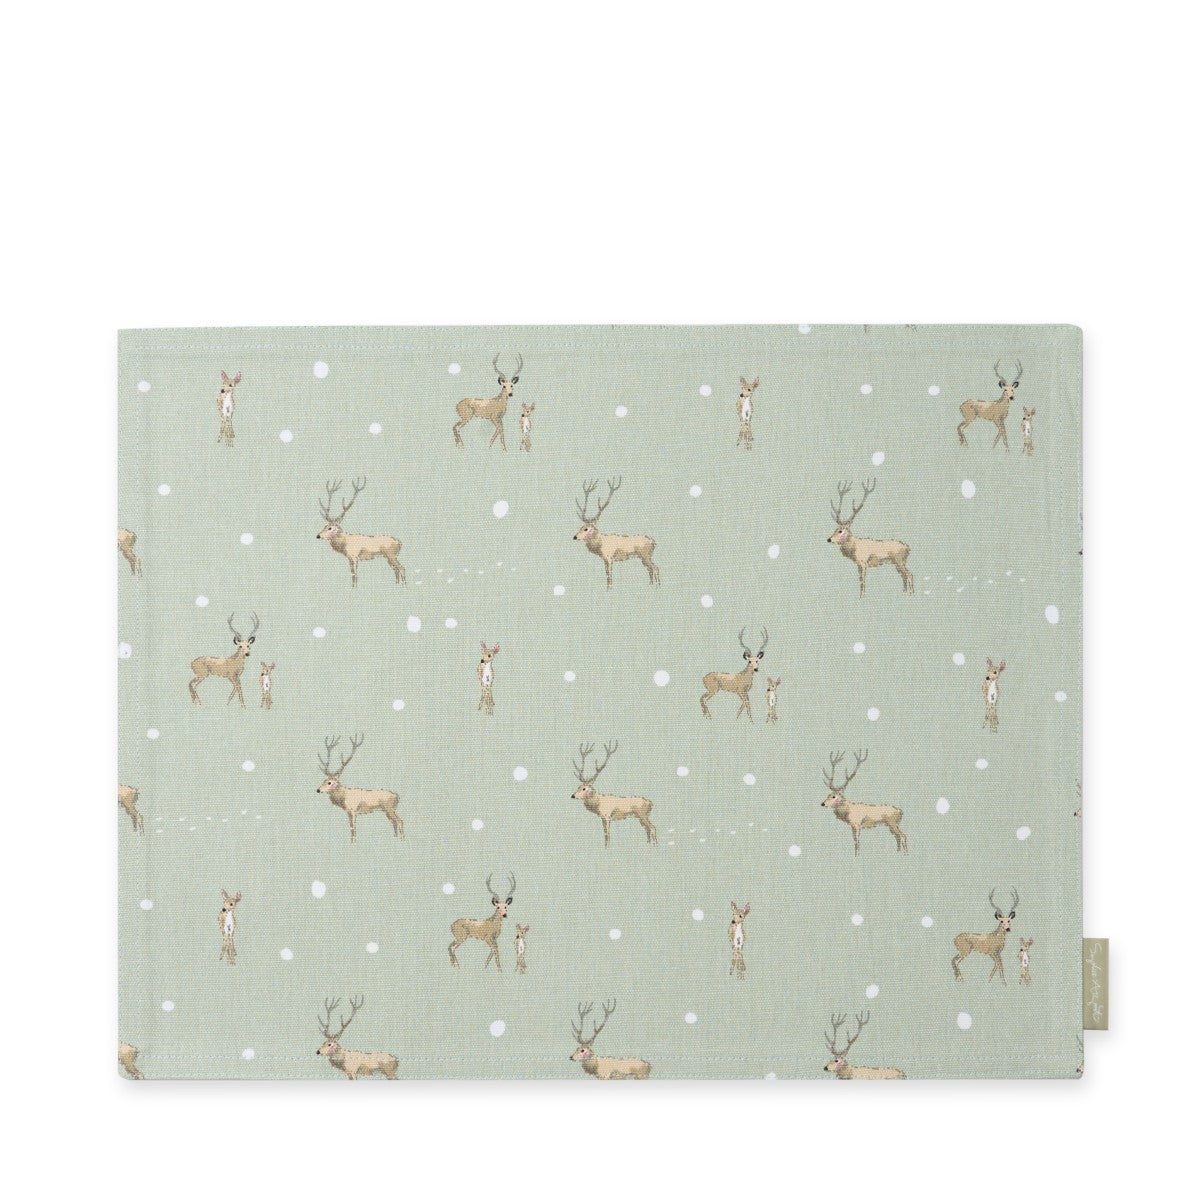 Christmas Stags Fabric Placemat (Set of 2)